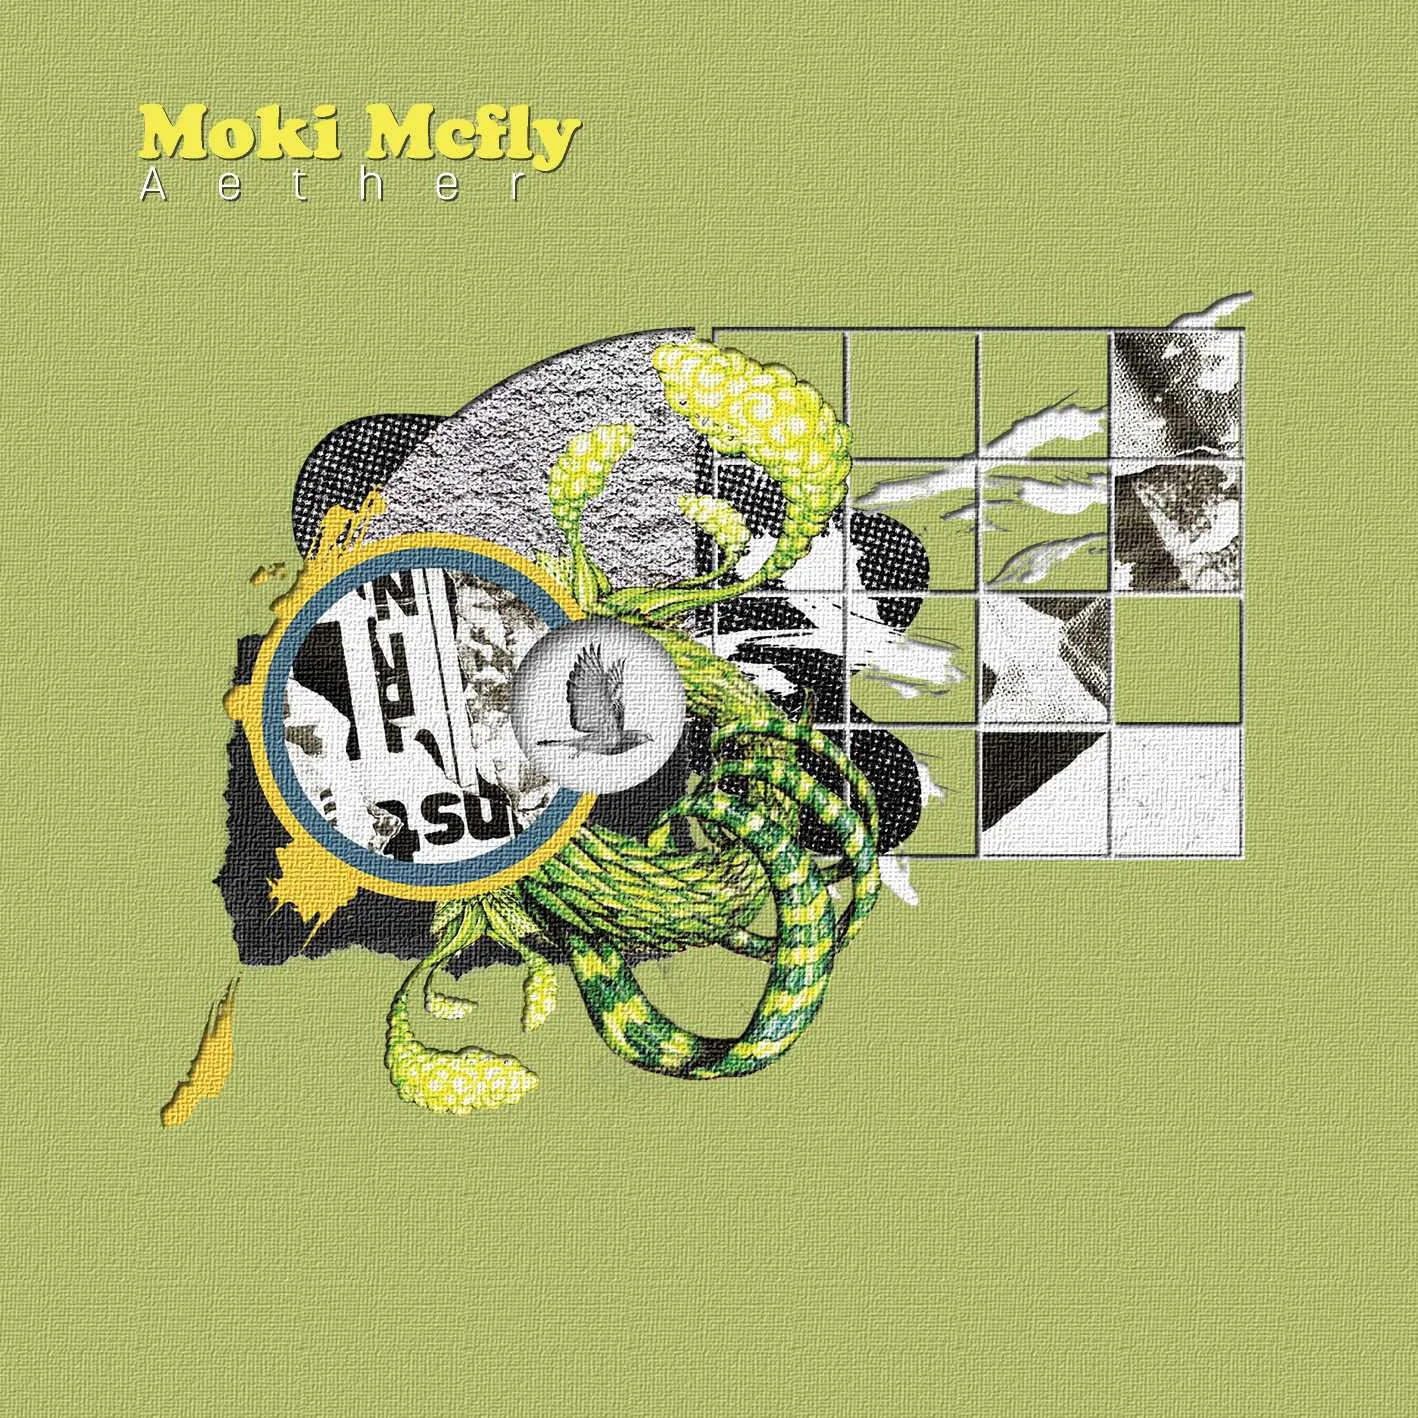 Album cover for “Aether” by Moki Mcfly